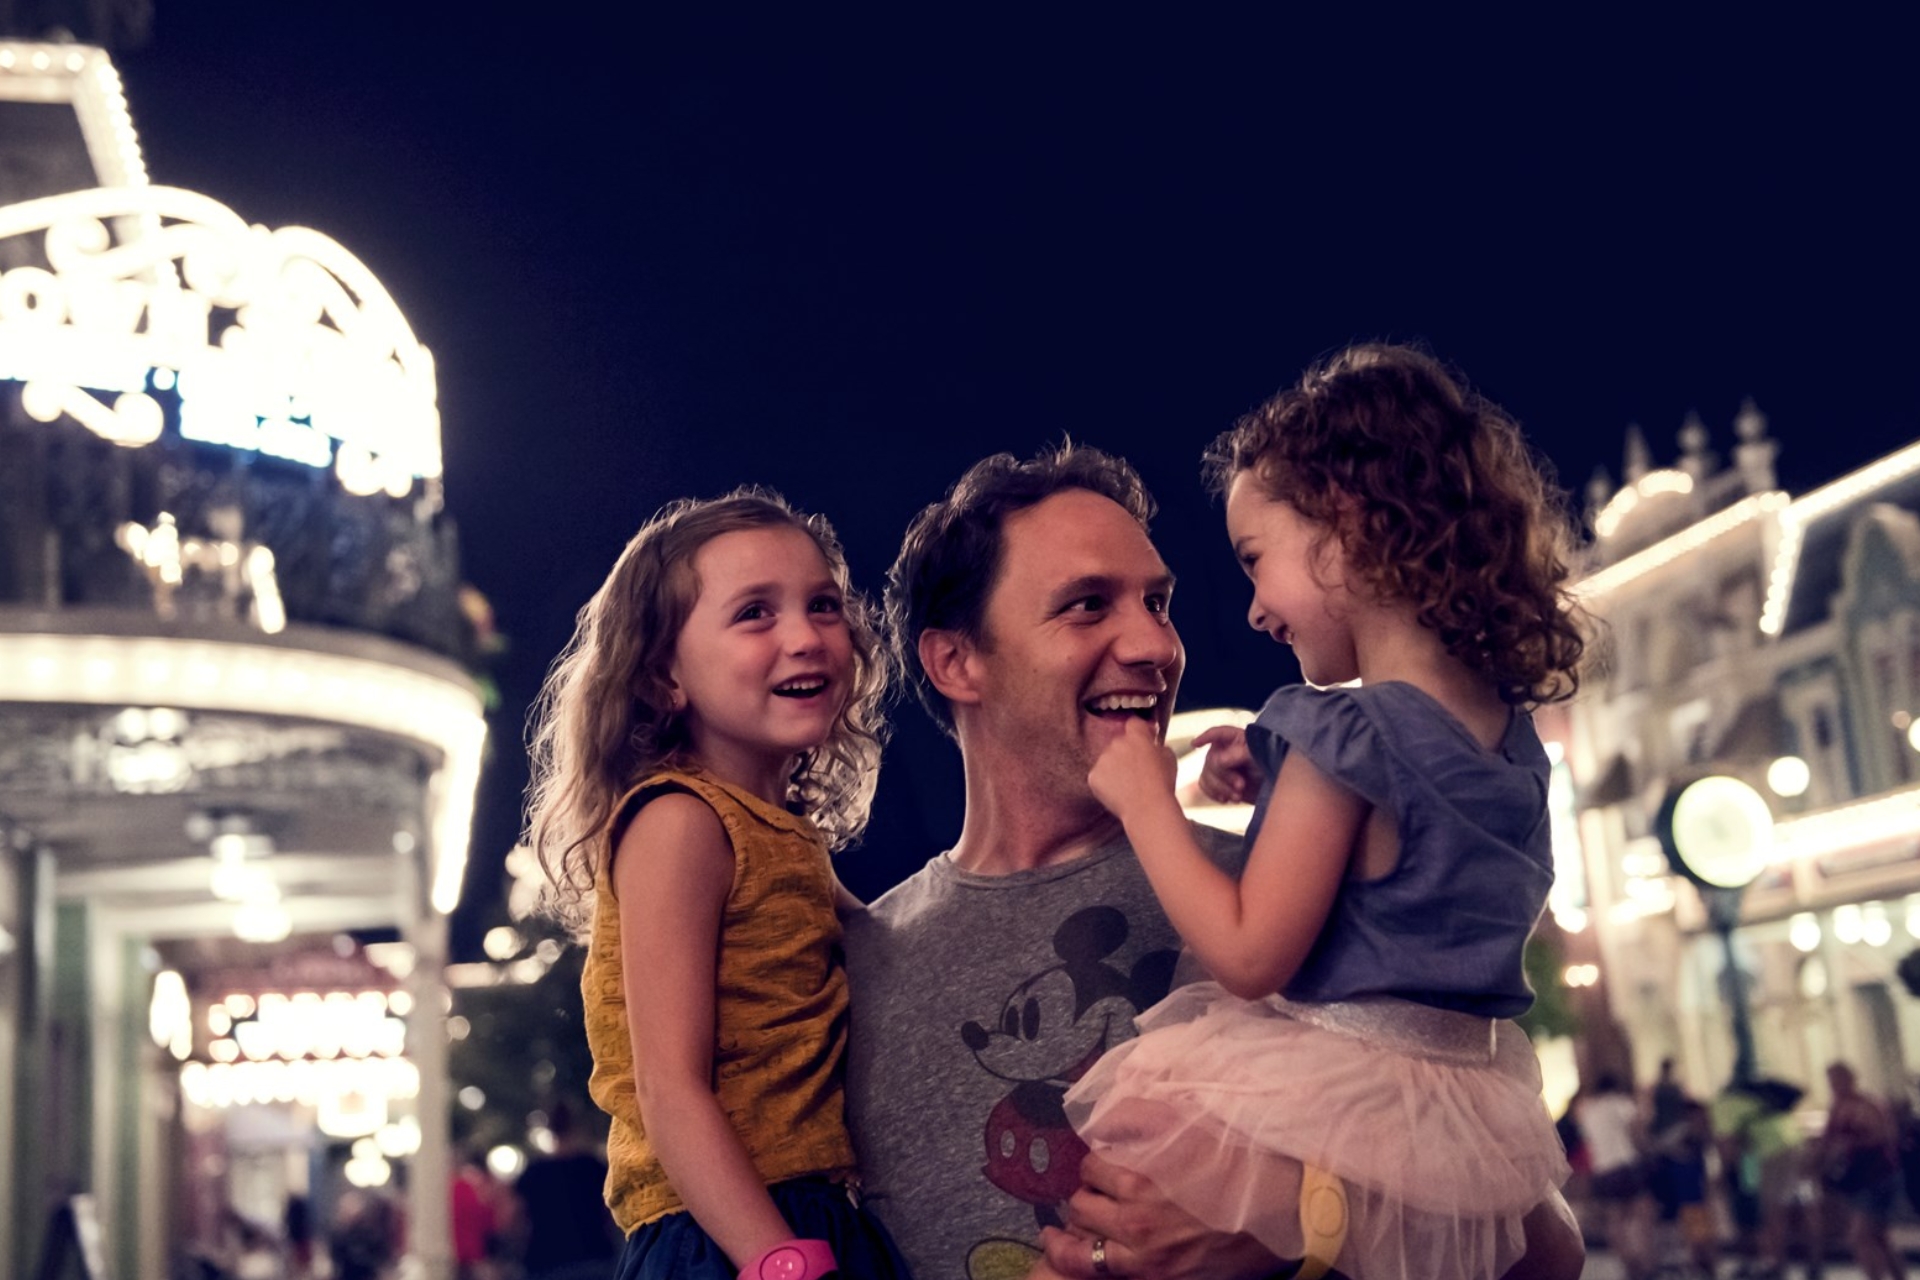 A father holds his two daughters and smiles, Magic Kingdom park at Disney in the background. Night.